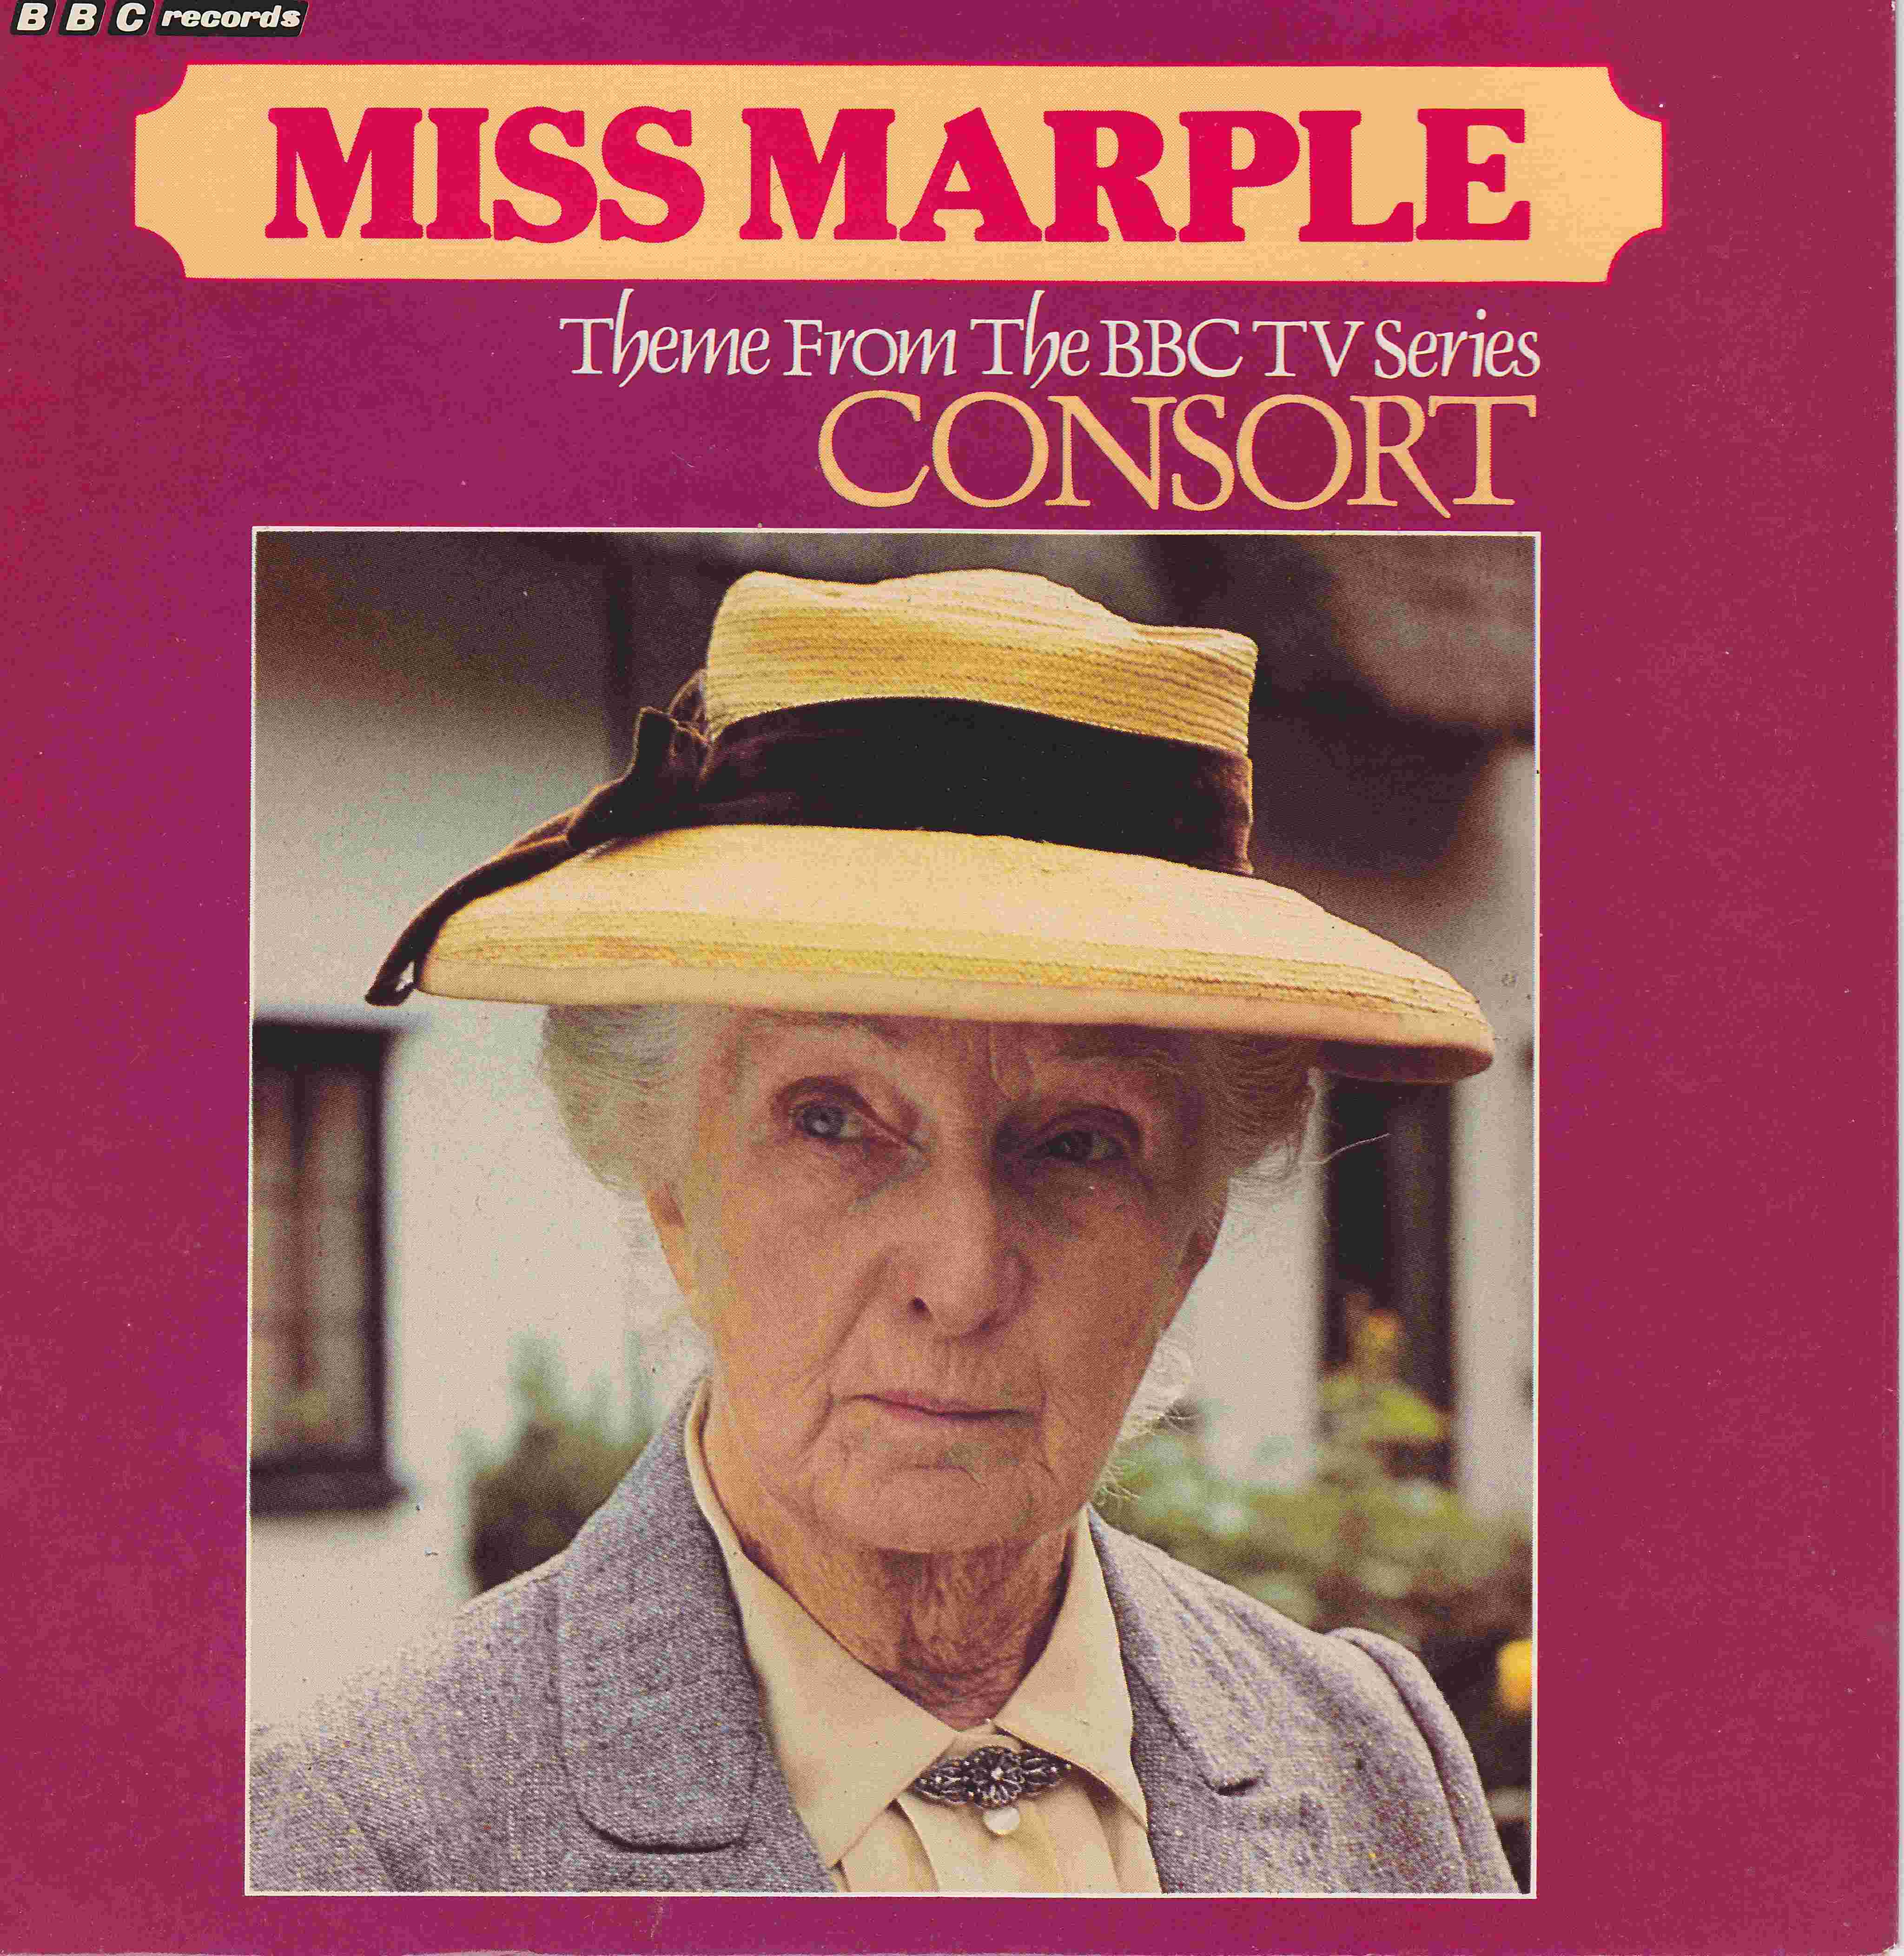 Picture of Miss Marple by artist Ken Howard / Alan Blaikley / John Altman / Consort from the BBC singles - Records and Tapes library